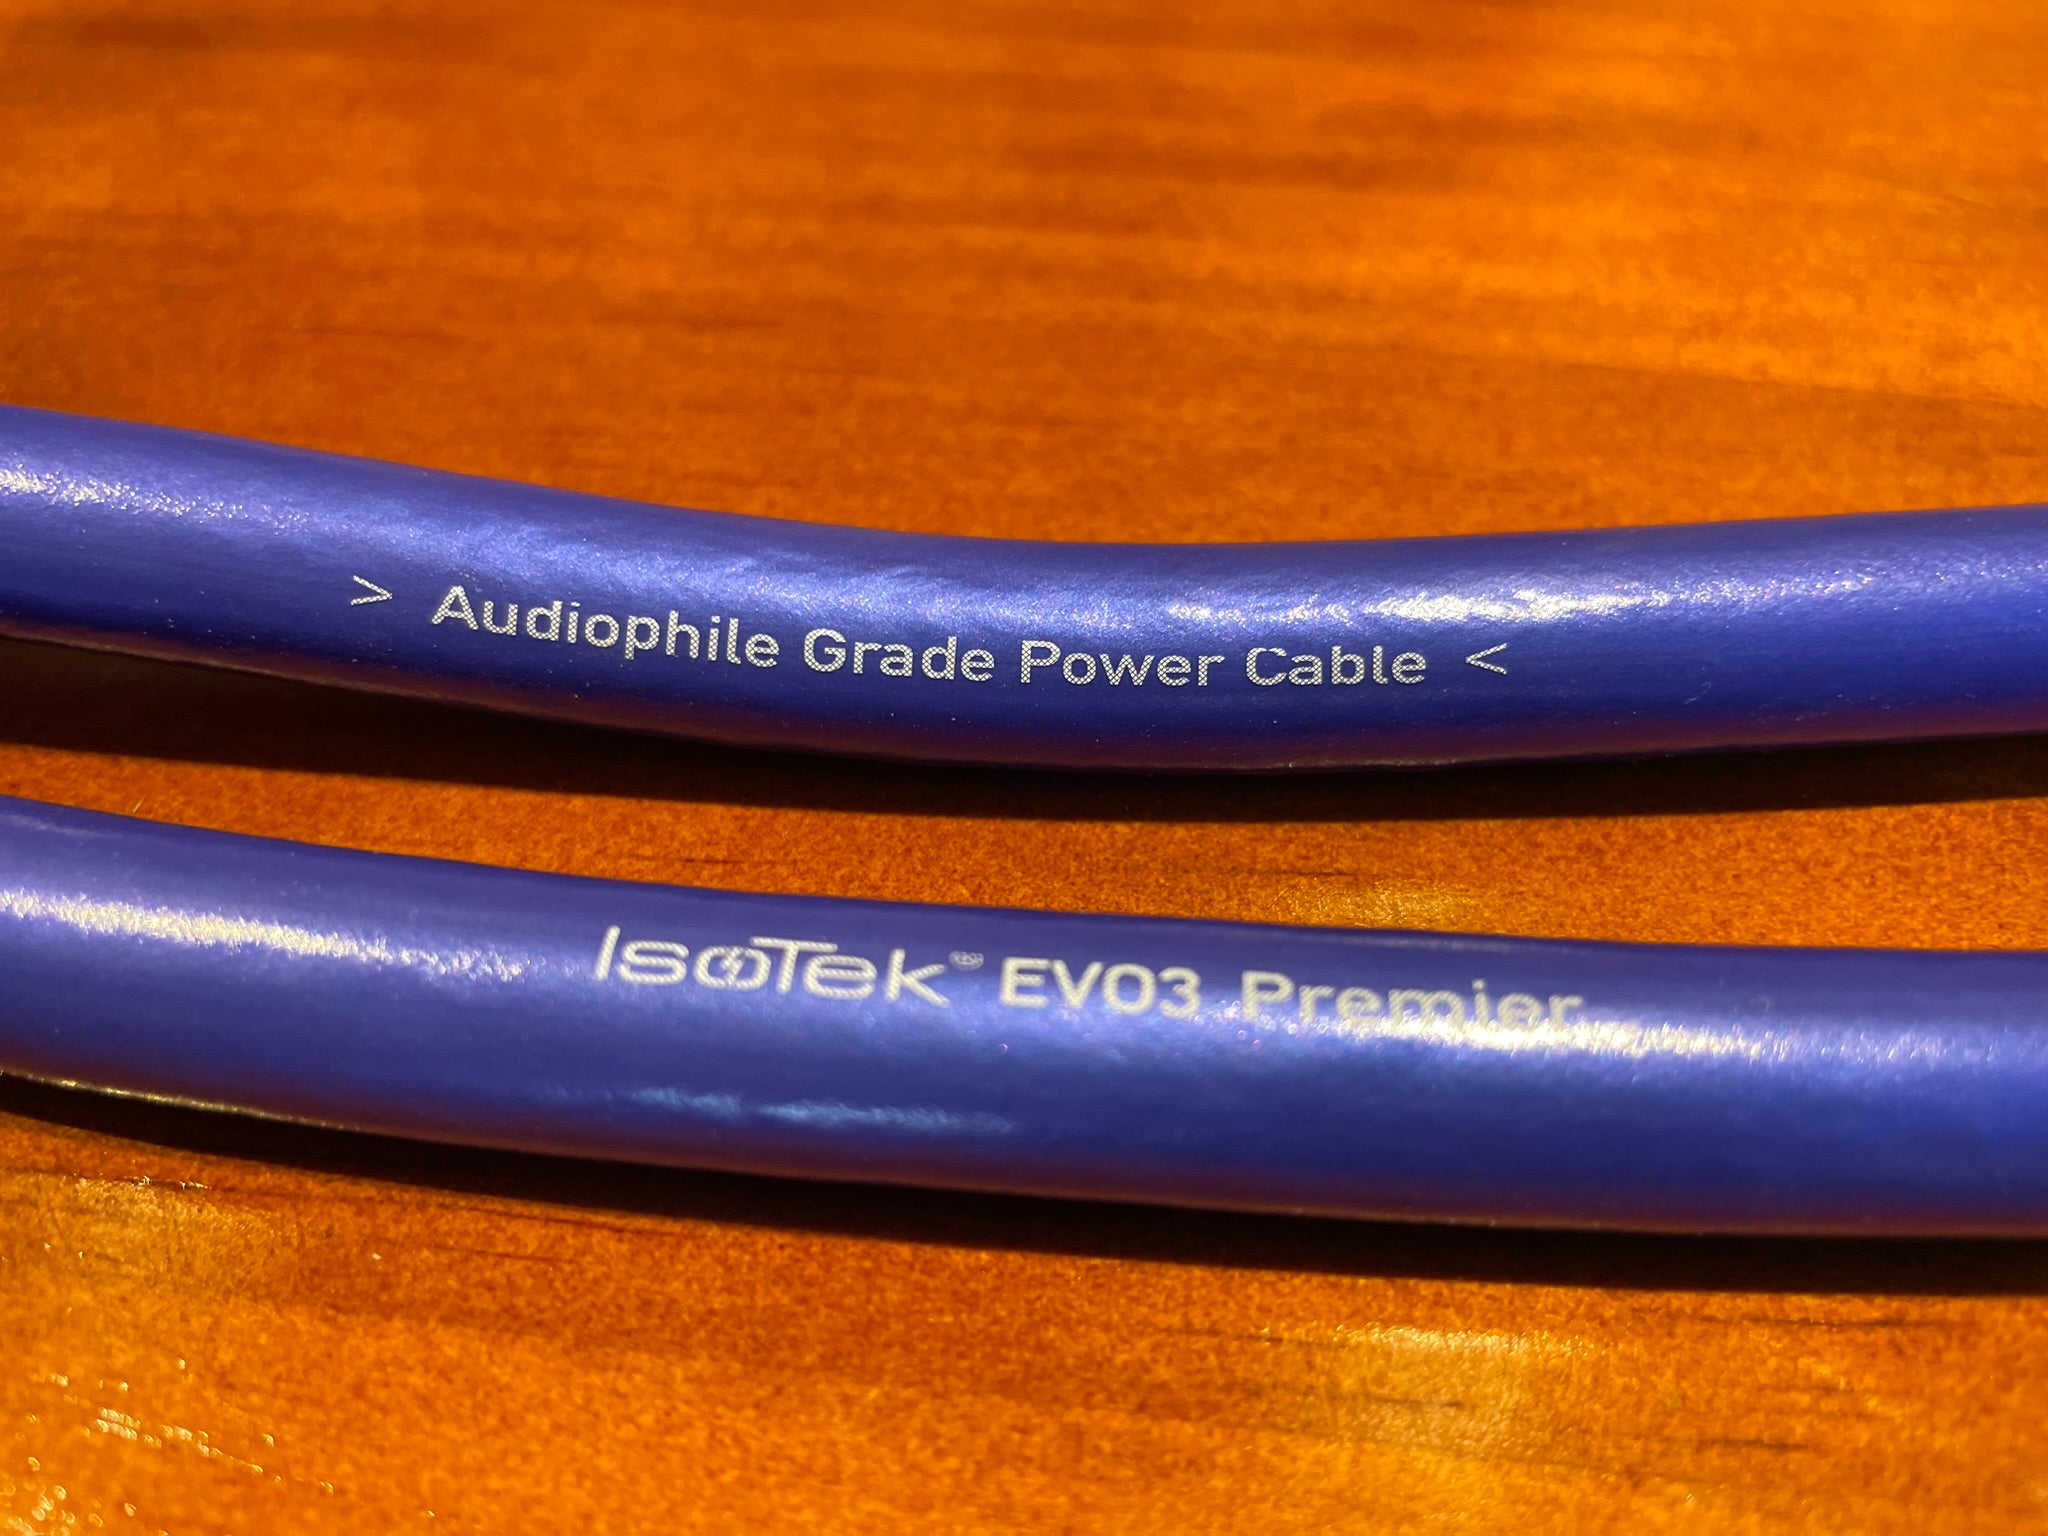 IsoTek Evo3 Premier Power Cable 1.5m (C19, 20 Amp Plug) - As Traded